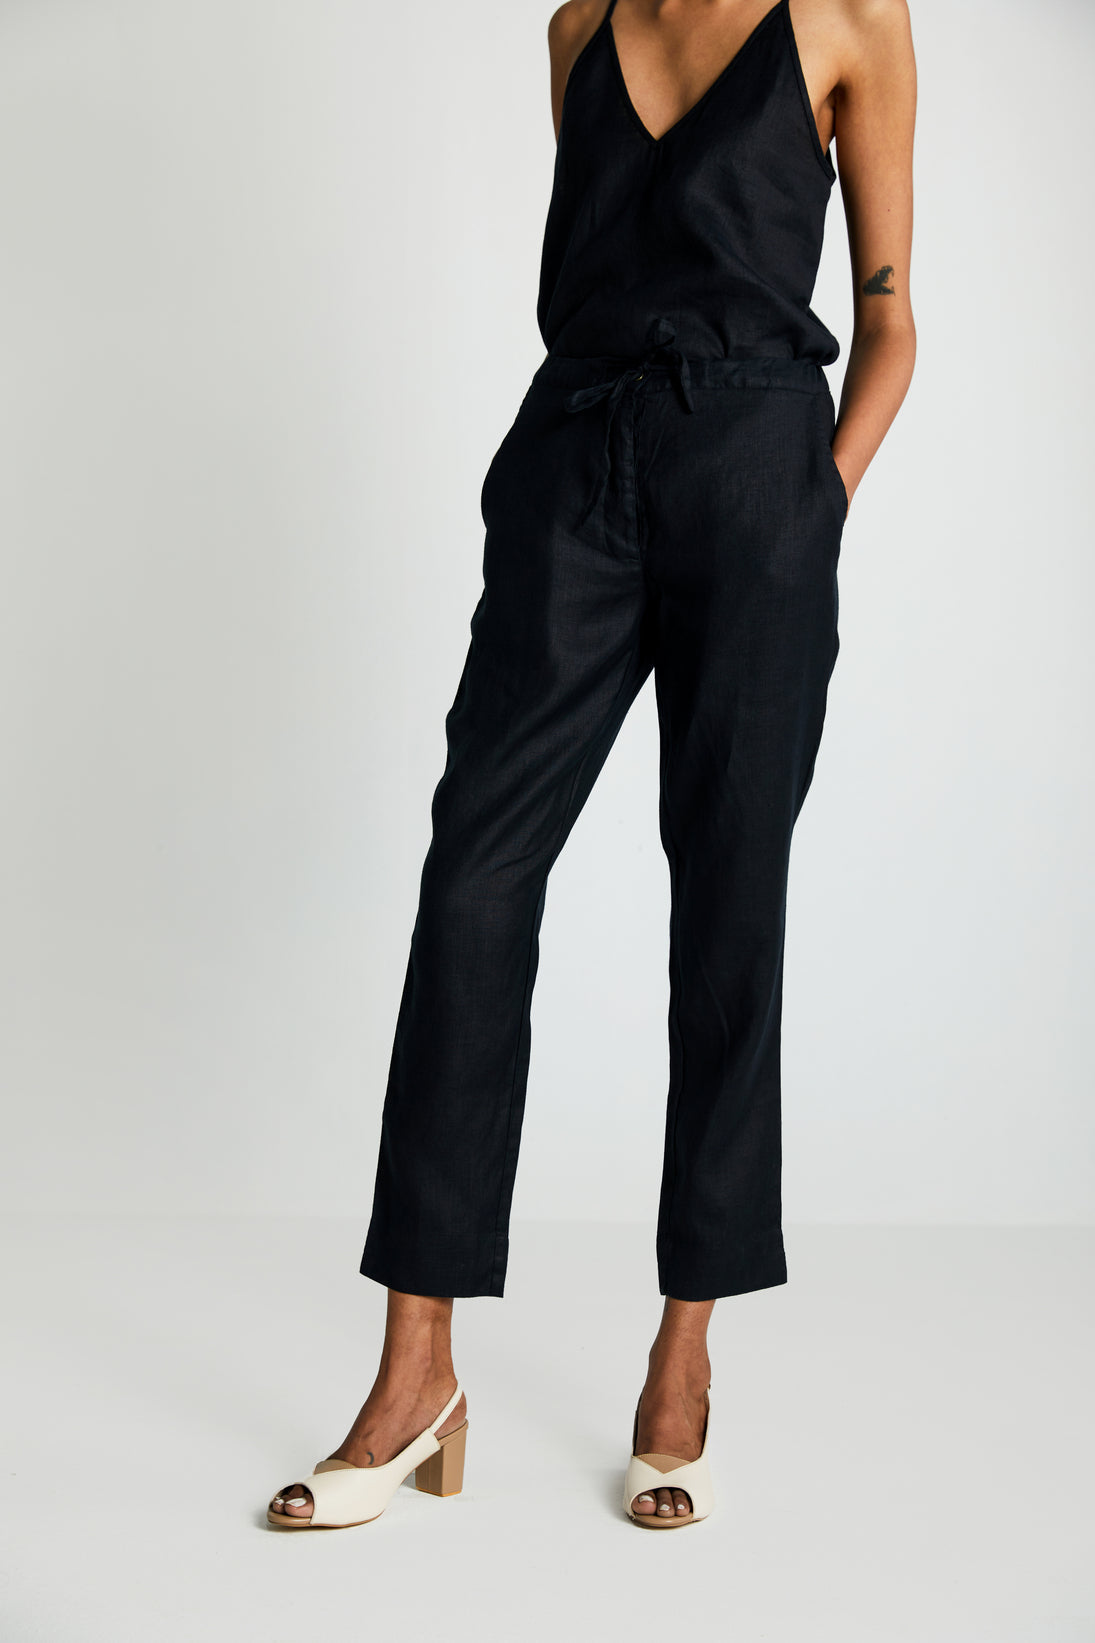 The Goes with Everything Pant at Kamakhyaa by Reistor. This item is Black, Hemp, Natural, Noir, Office Wear, Pants, Regular Fit, Solids, Womenswear